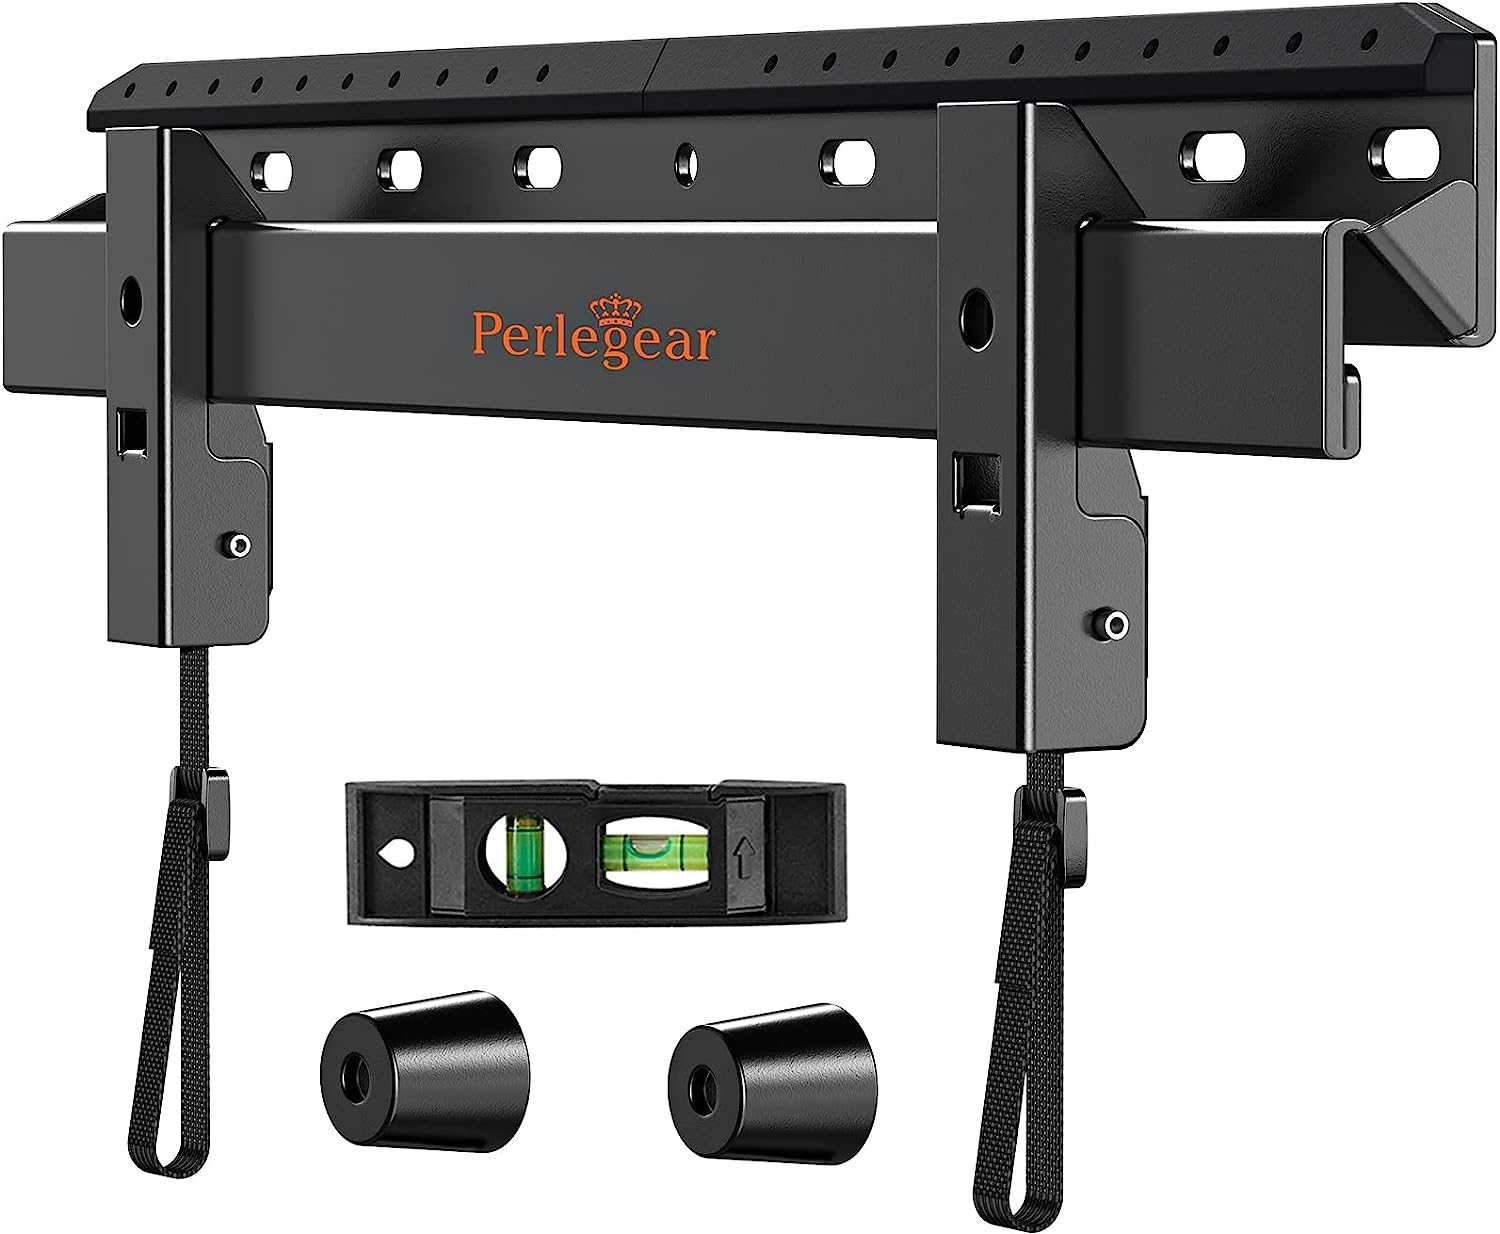 Perlegear Studless Heavy-Duty TV Wall Mount (for Most 24-55 Inch TVs up to 100 lbs) $8.99